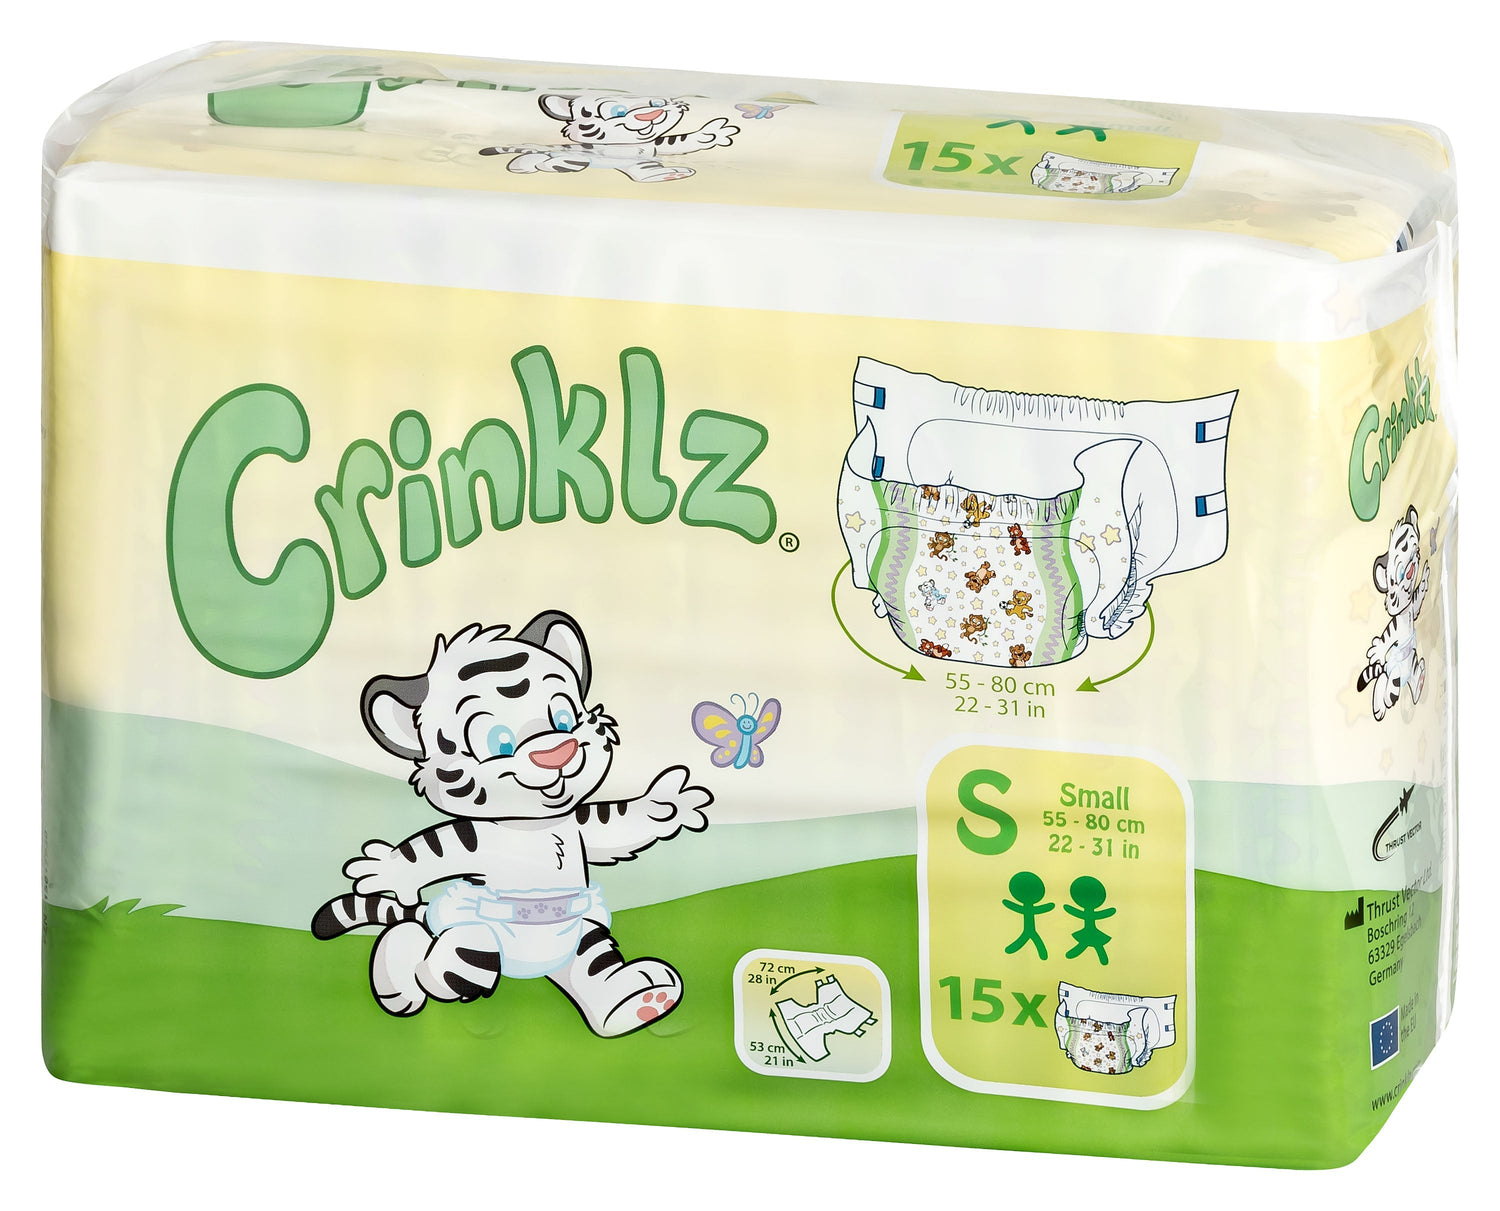 Crinklz Original adult diaper polybag size S front view